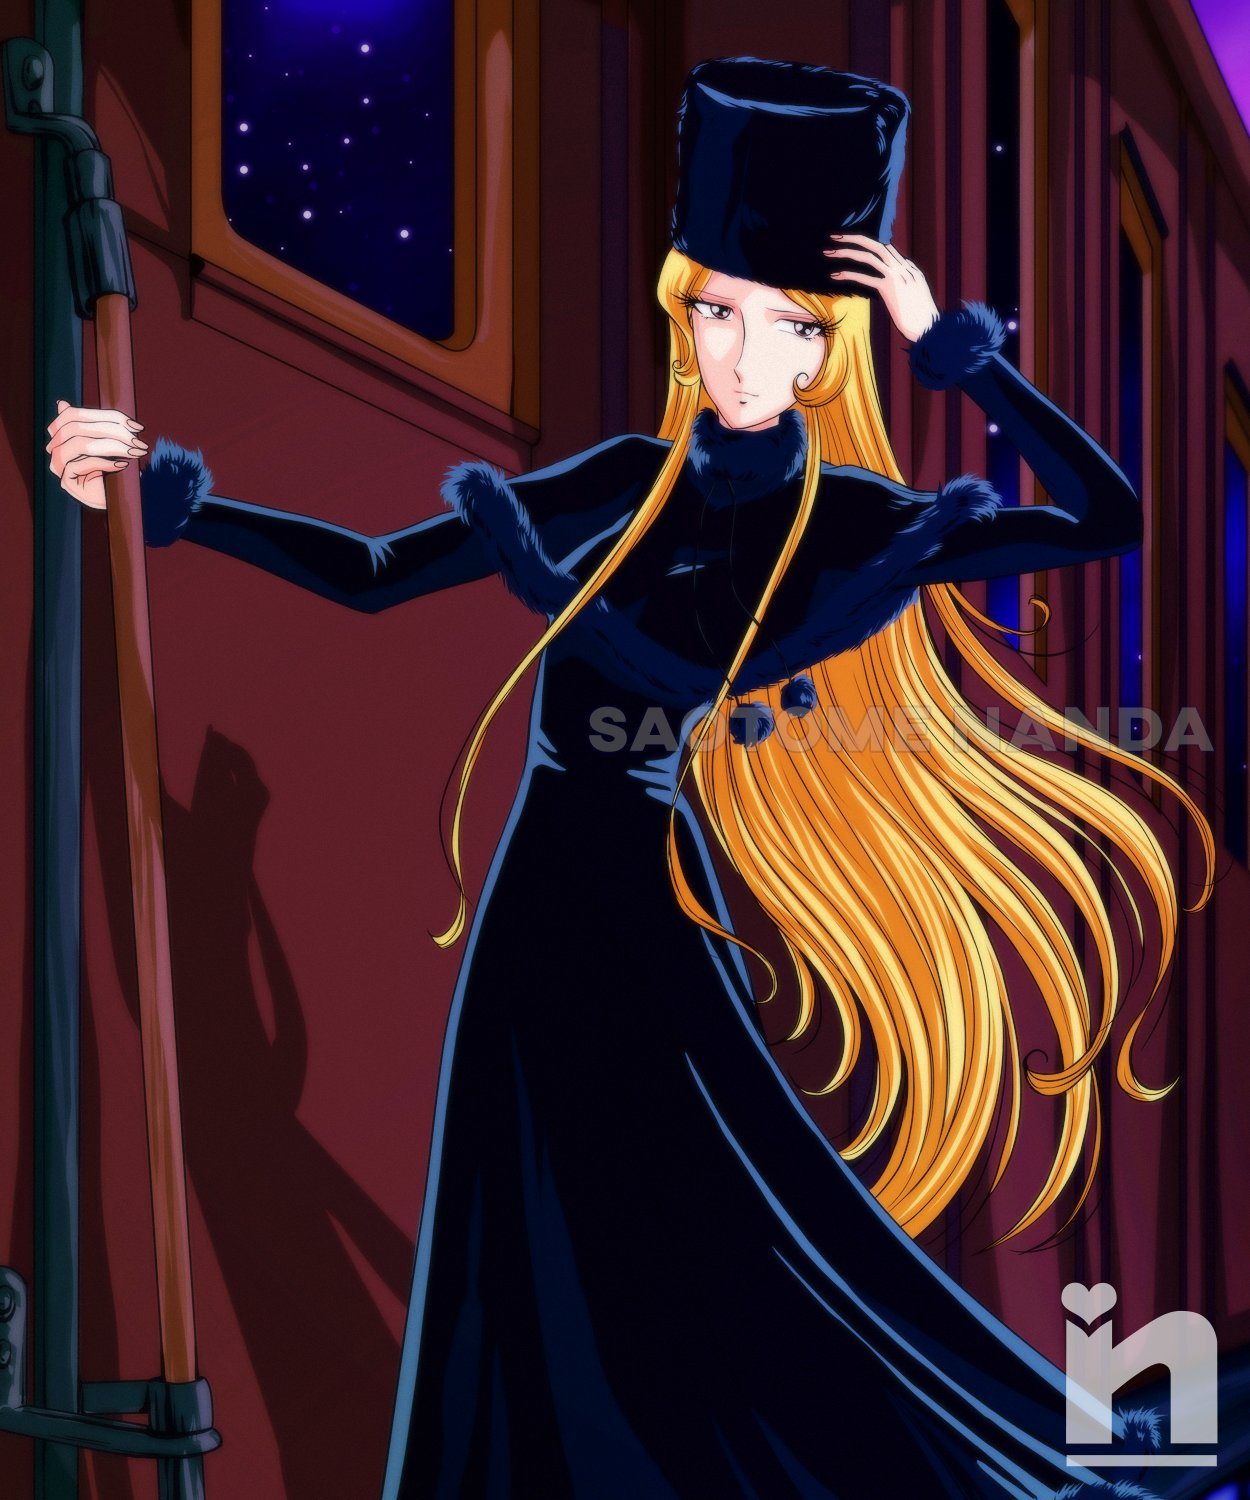 Nanda 3 16 Maetel Fan Art Dedicated To Cole Pegelow Original Character From Galaxy Express 999 1987 Do Not Remove Watermarks Regular Commissions Are Open Maetel Galaxyexpress999 Leijimatsumoto